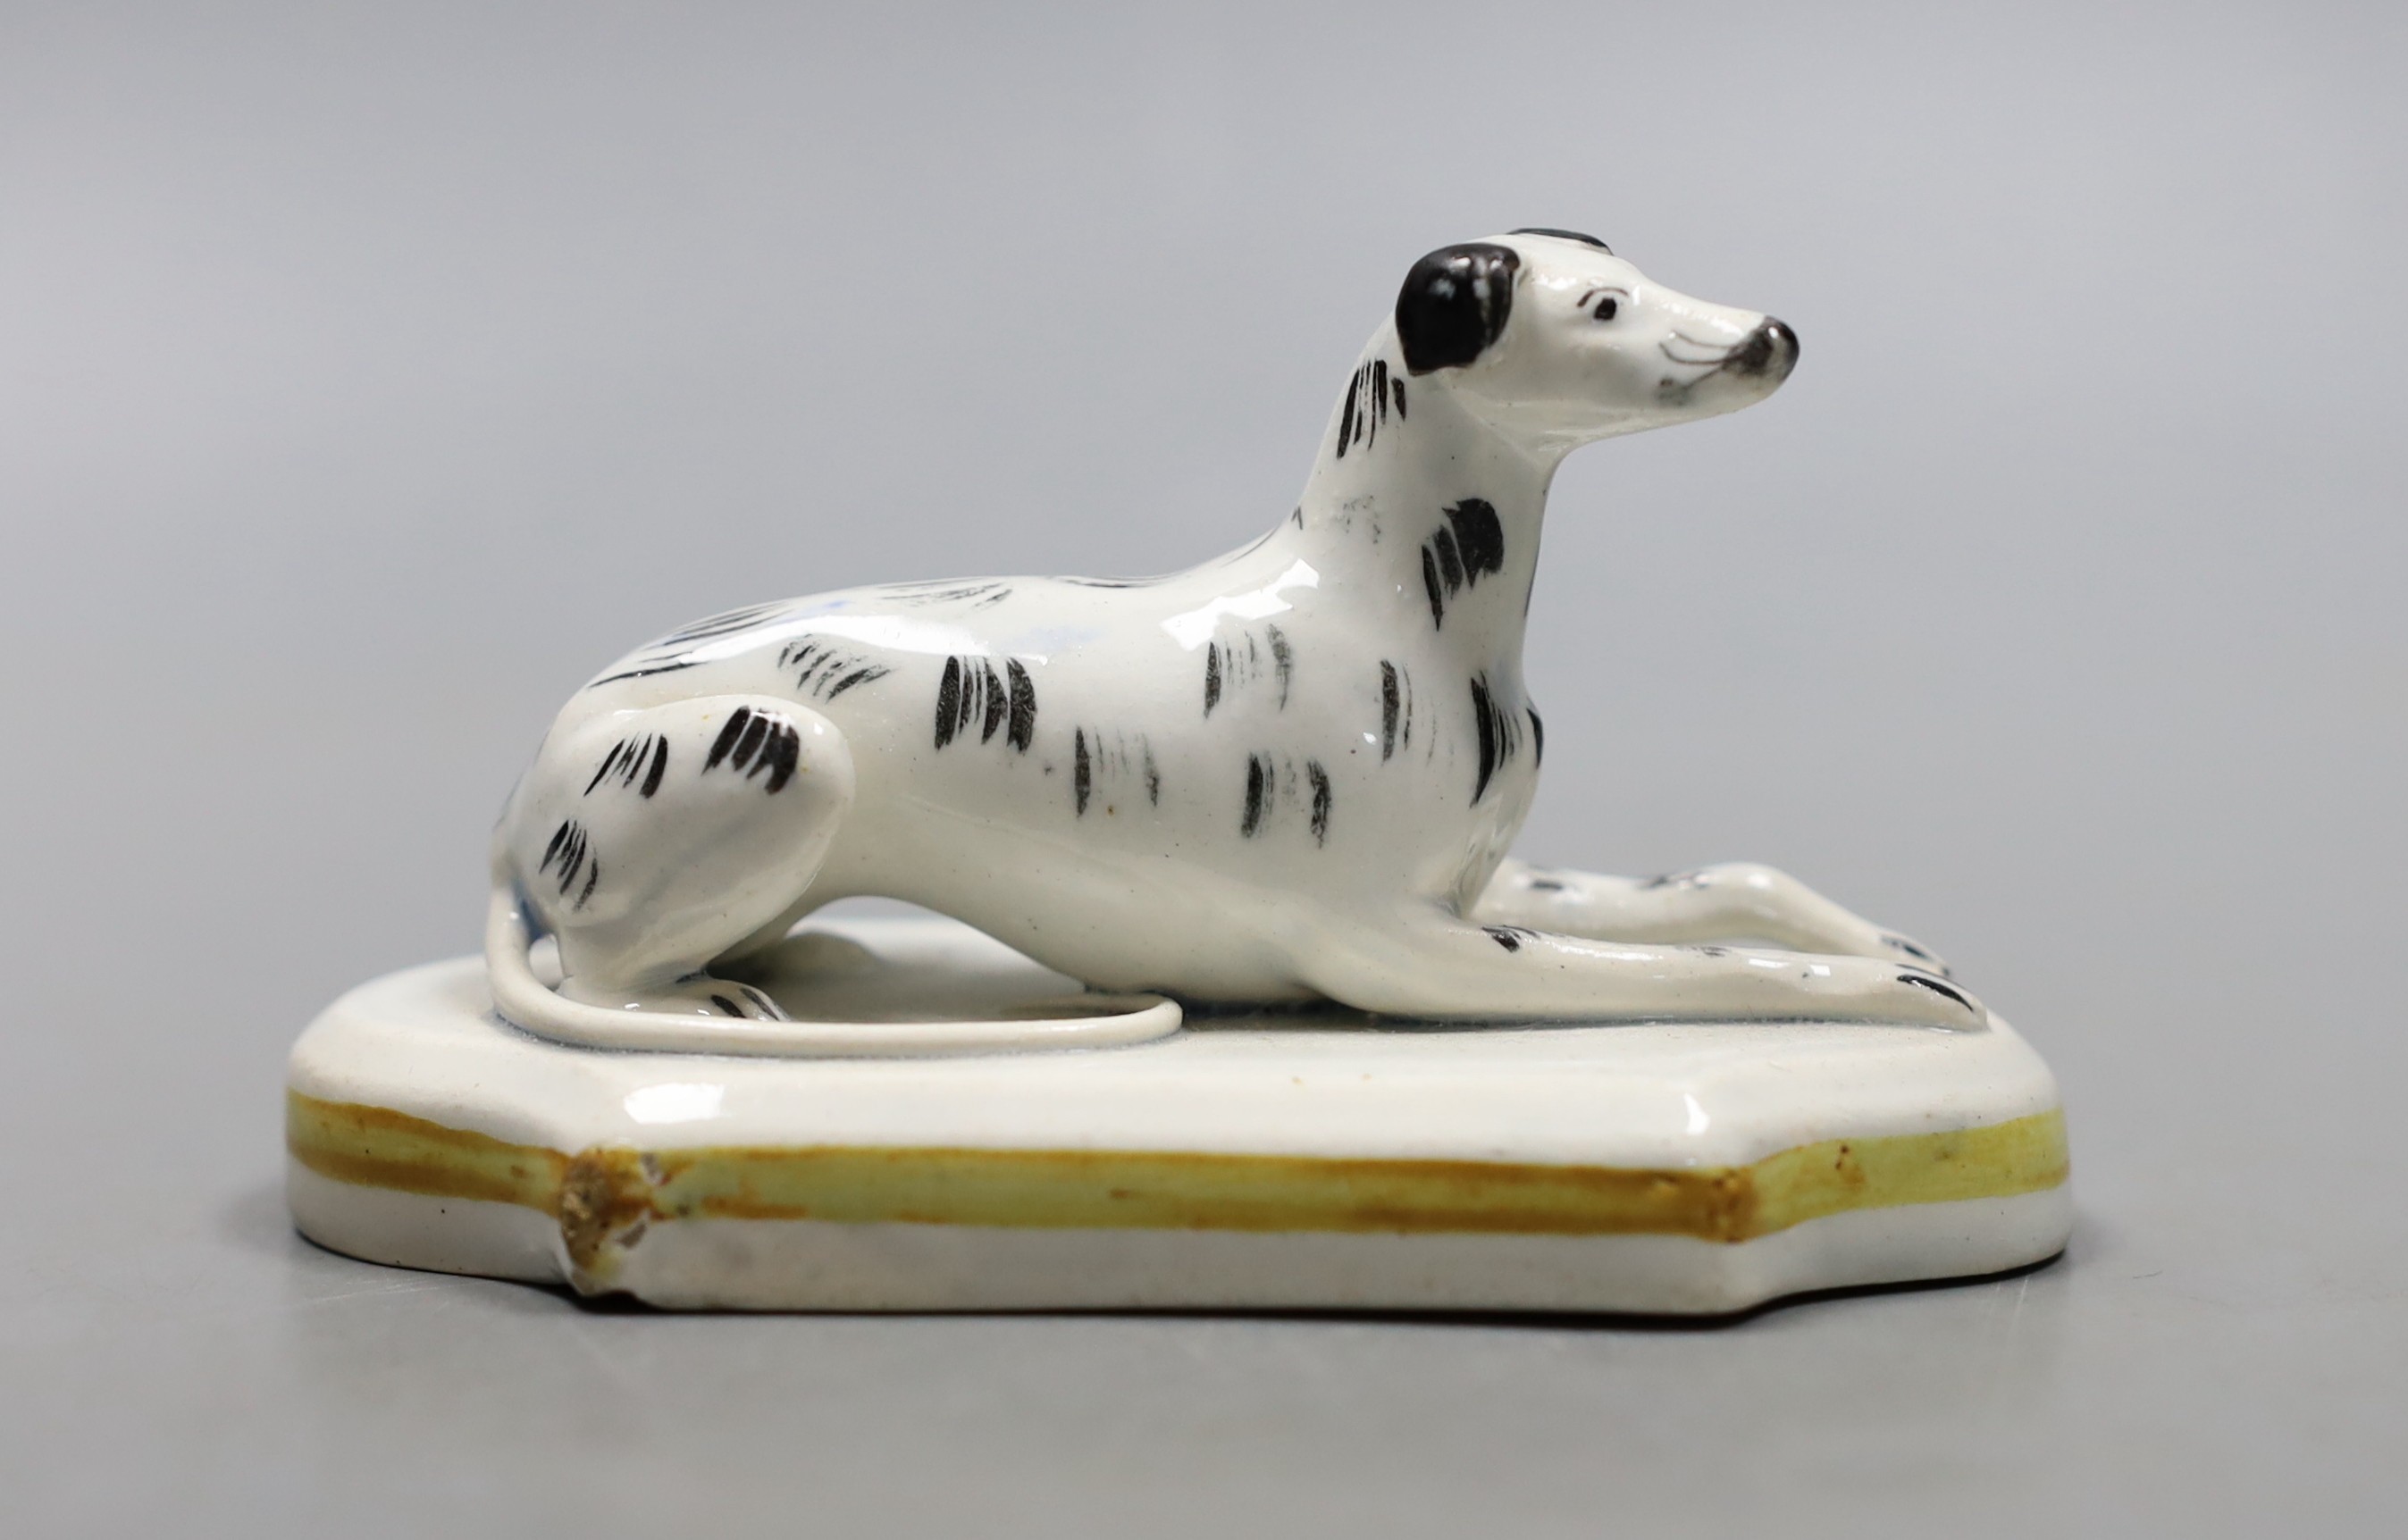 A Staffordshire porcelain model of a recumbent greyhound, c.1830–50, with black markings to its fur, 10.2 cm long, Provenance- Dennis G Rice collection